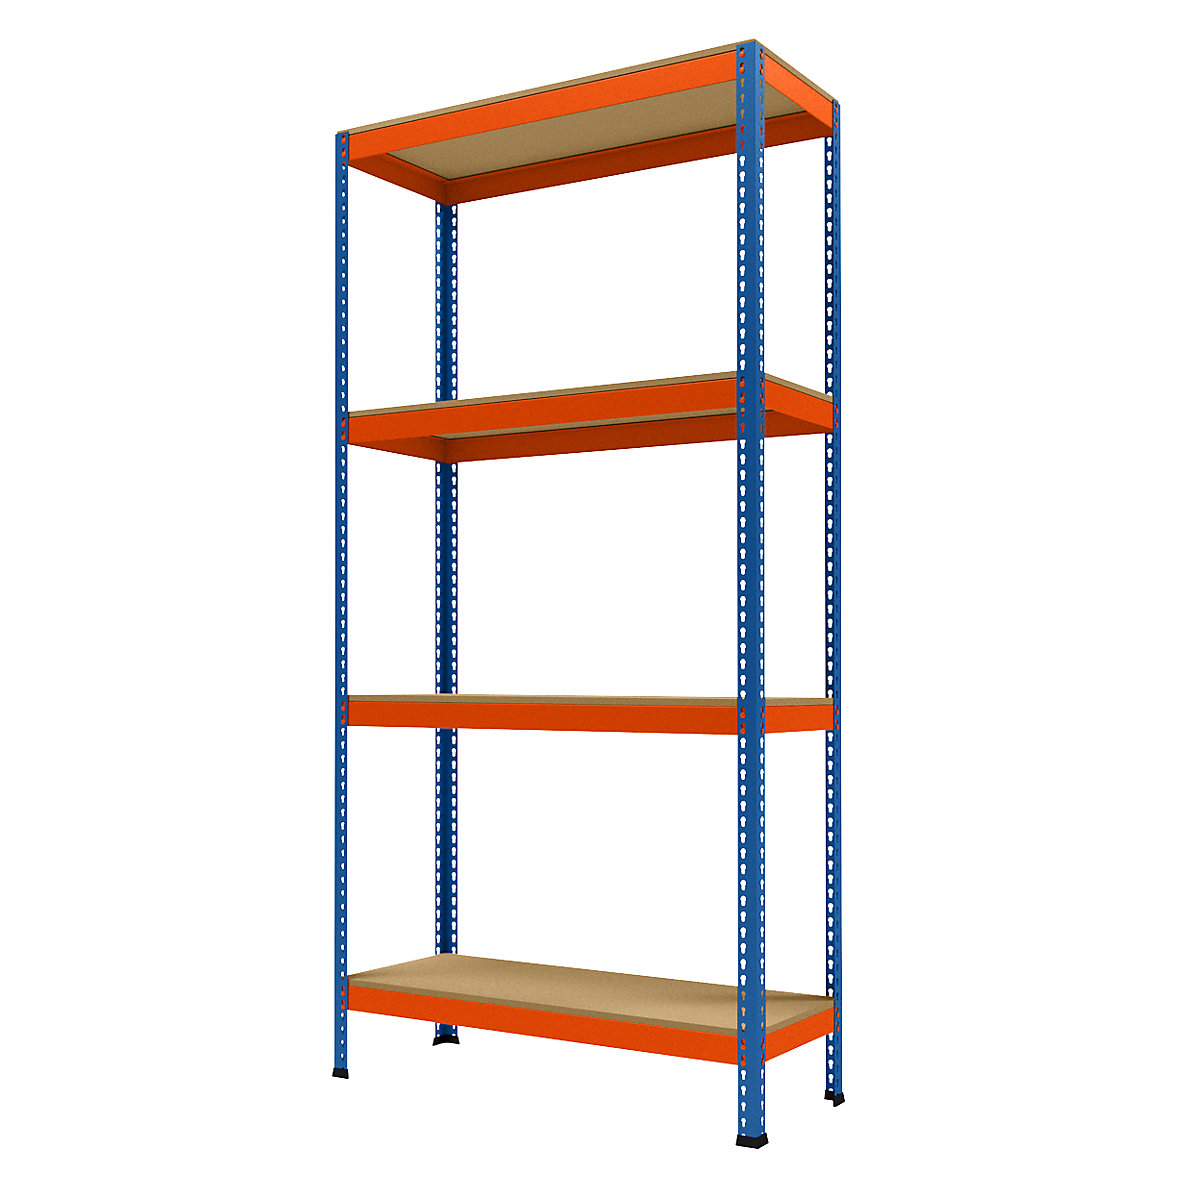 Wide span heavy duty shelving, height 2438 mm, overall depth 468 mm, width 1231 mm